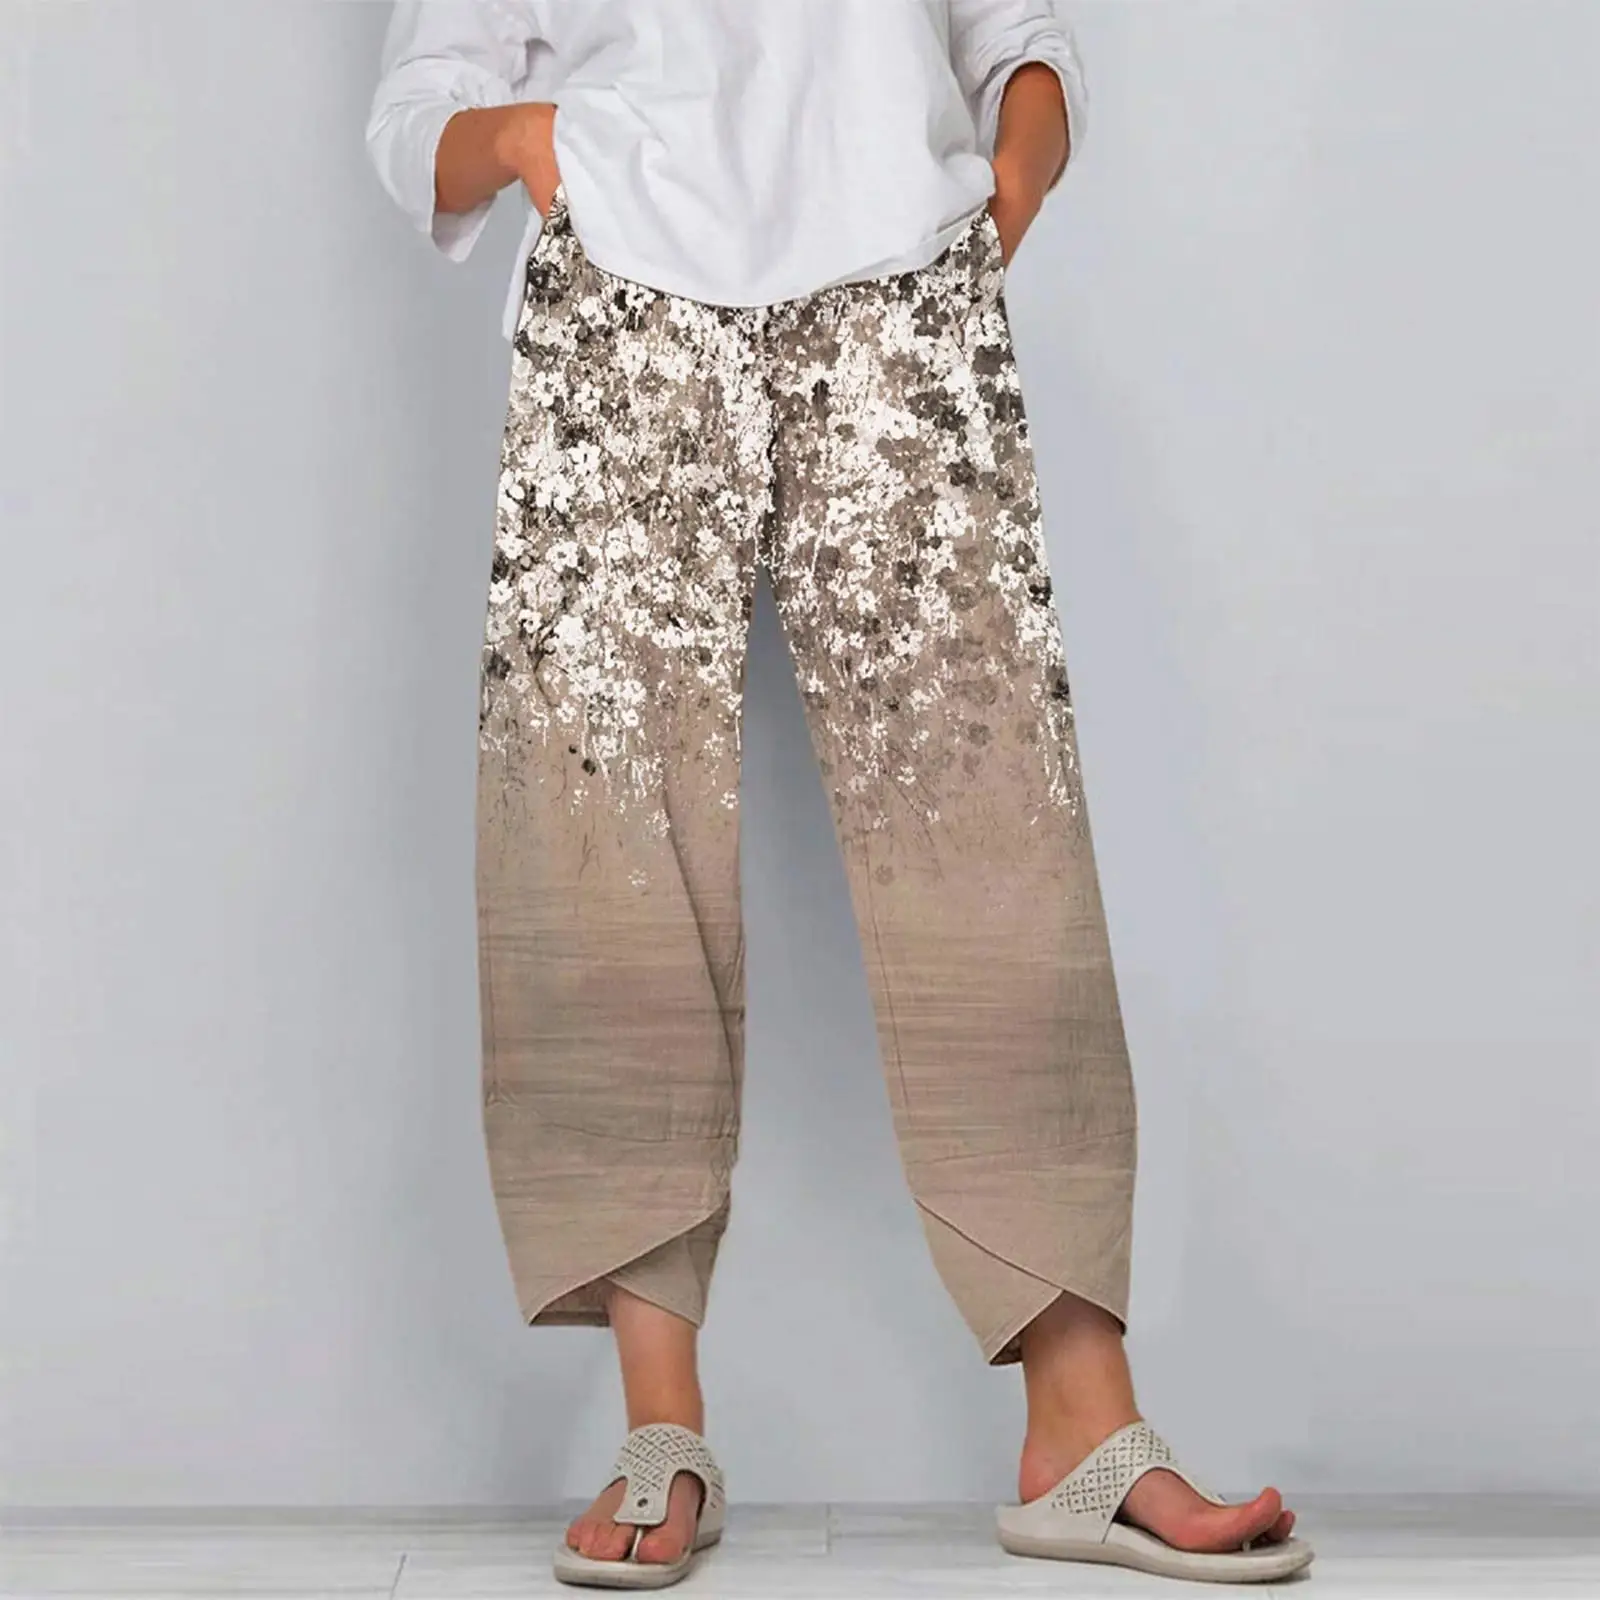 Fashion Leisure Pants Womens Printed Retro Side Pockets Straight Leg Summer Baggy Beach Cropped Trousers Floral